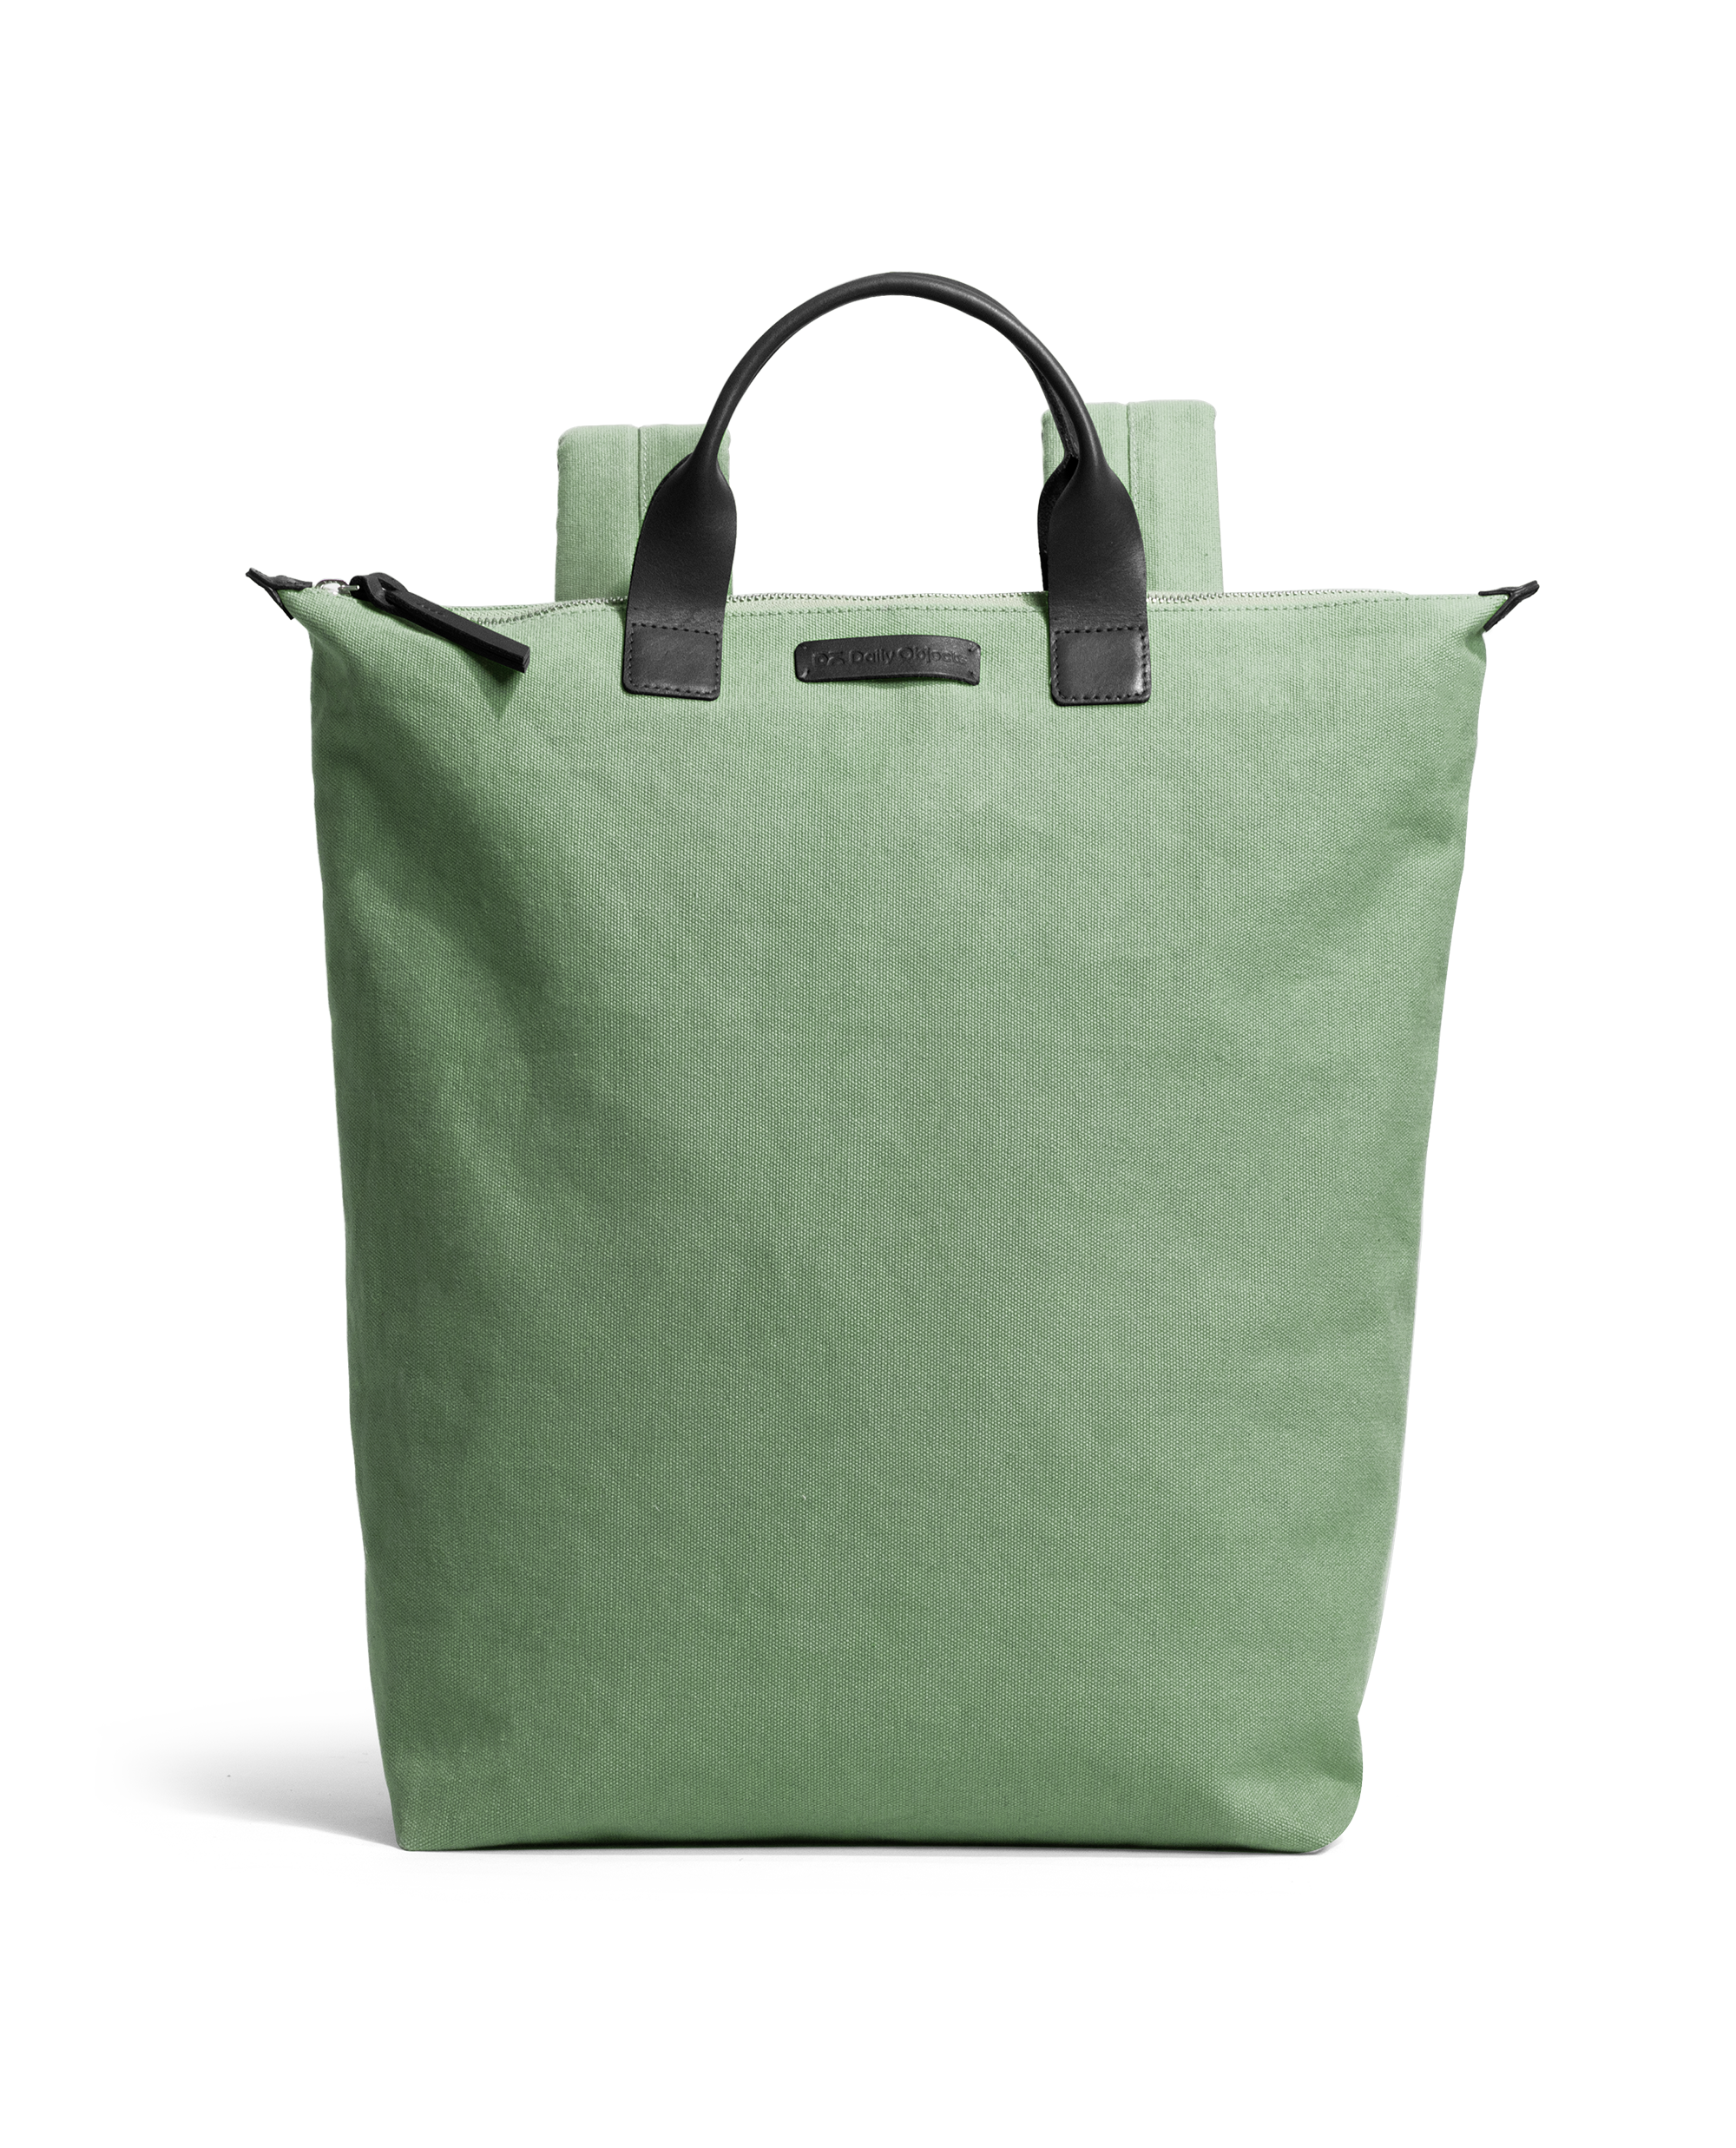 Osoi crescent shaped Toni mini bag smooth sage green leather | Pipe and row  - PIPE AND ROW